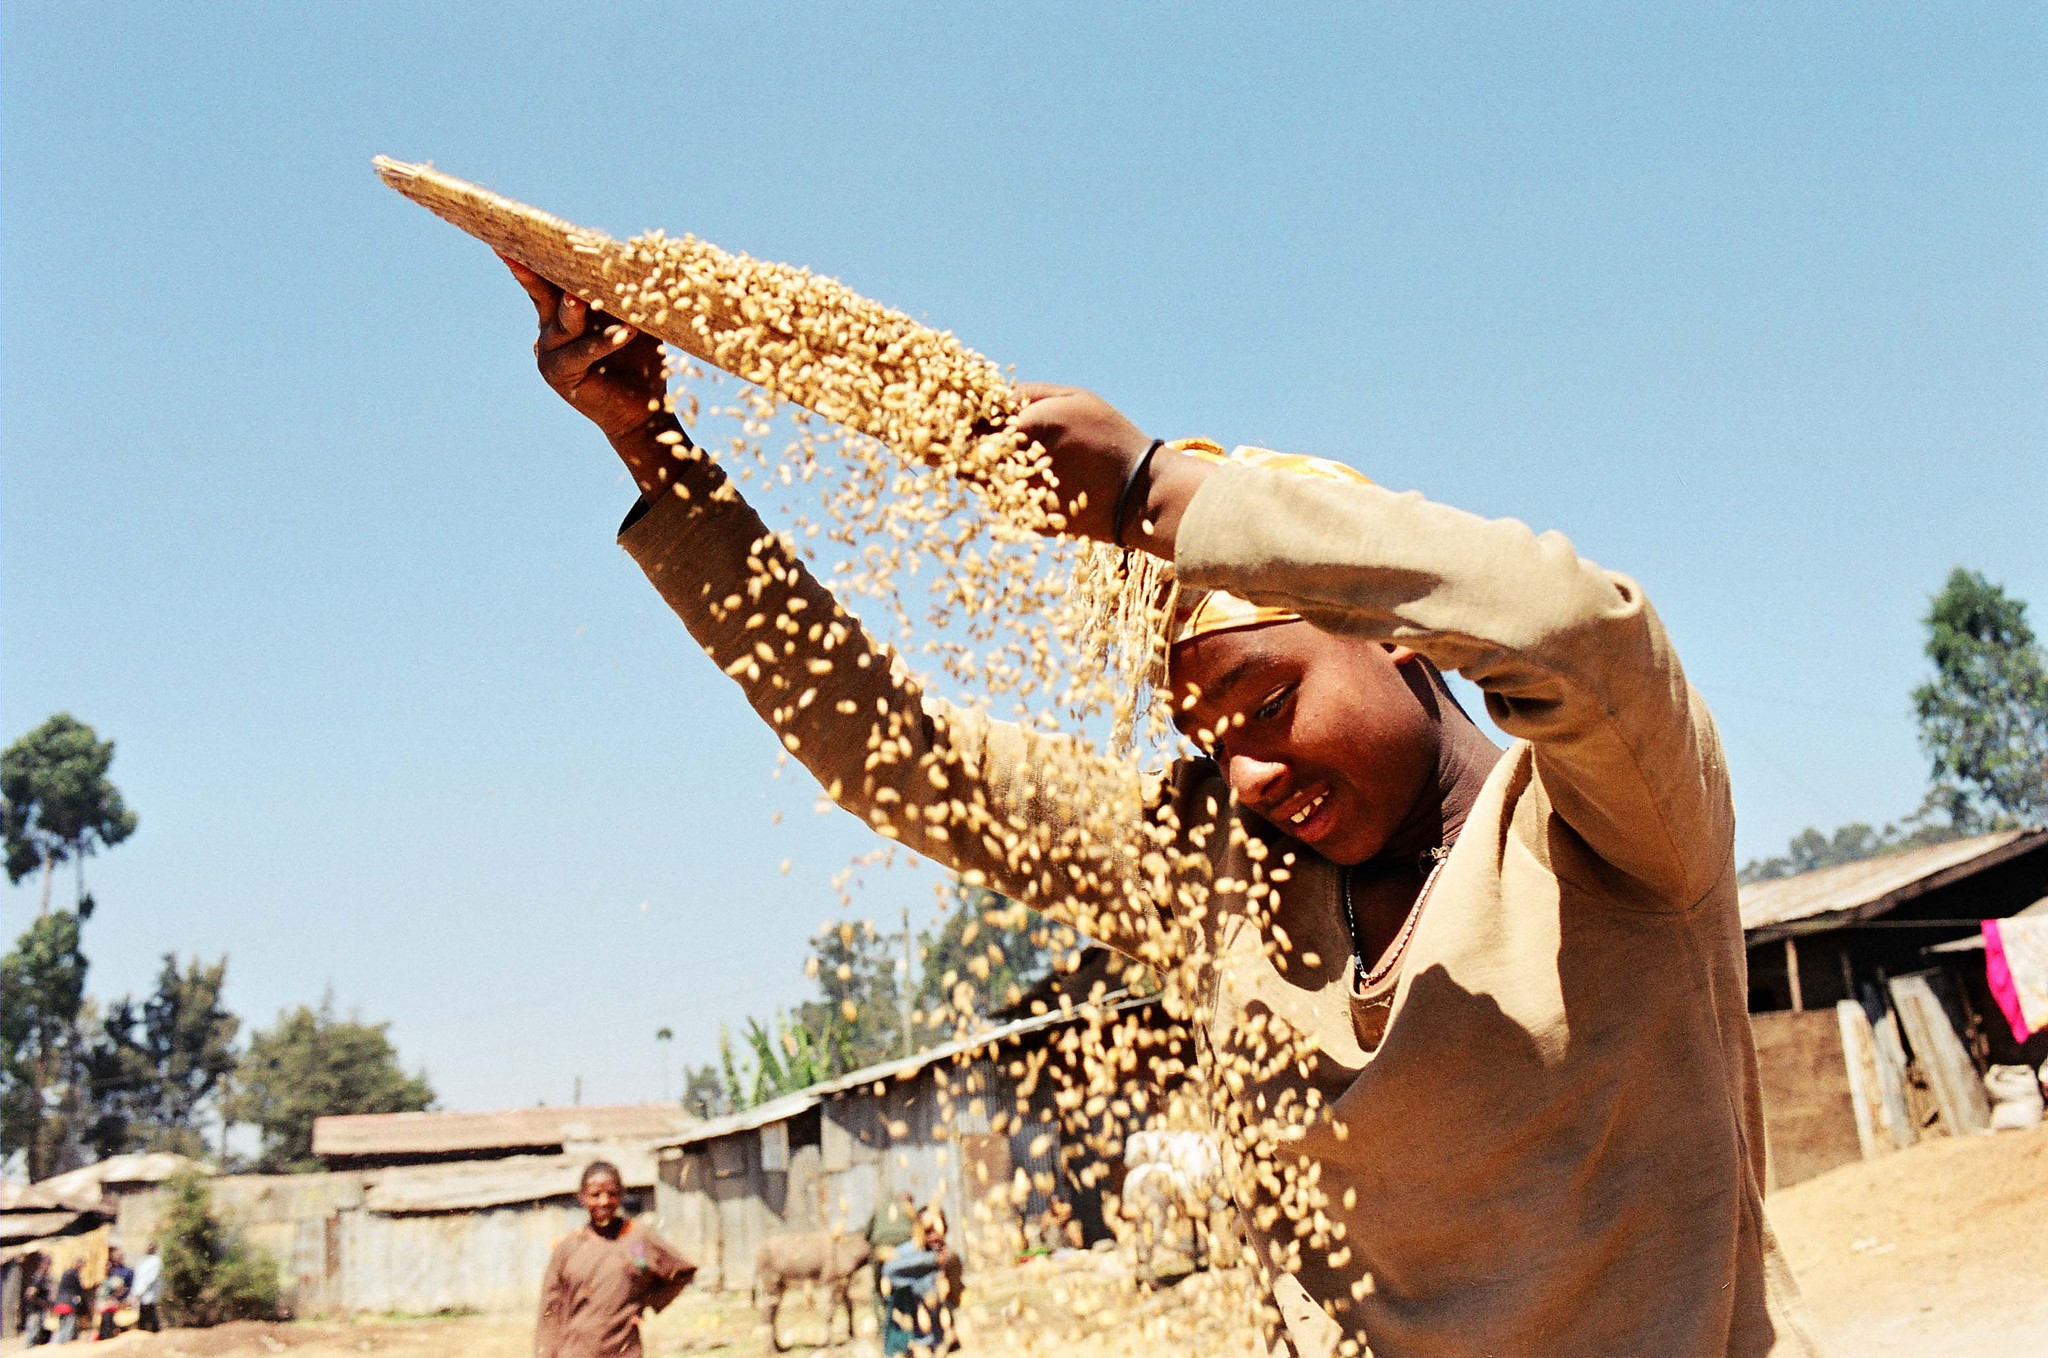 Young black man with light shirt sorting grains